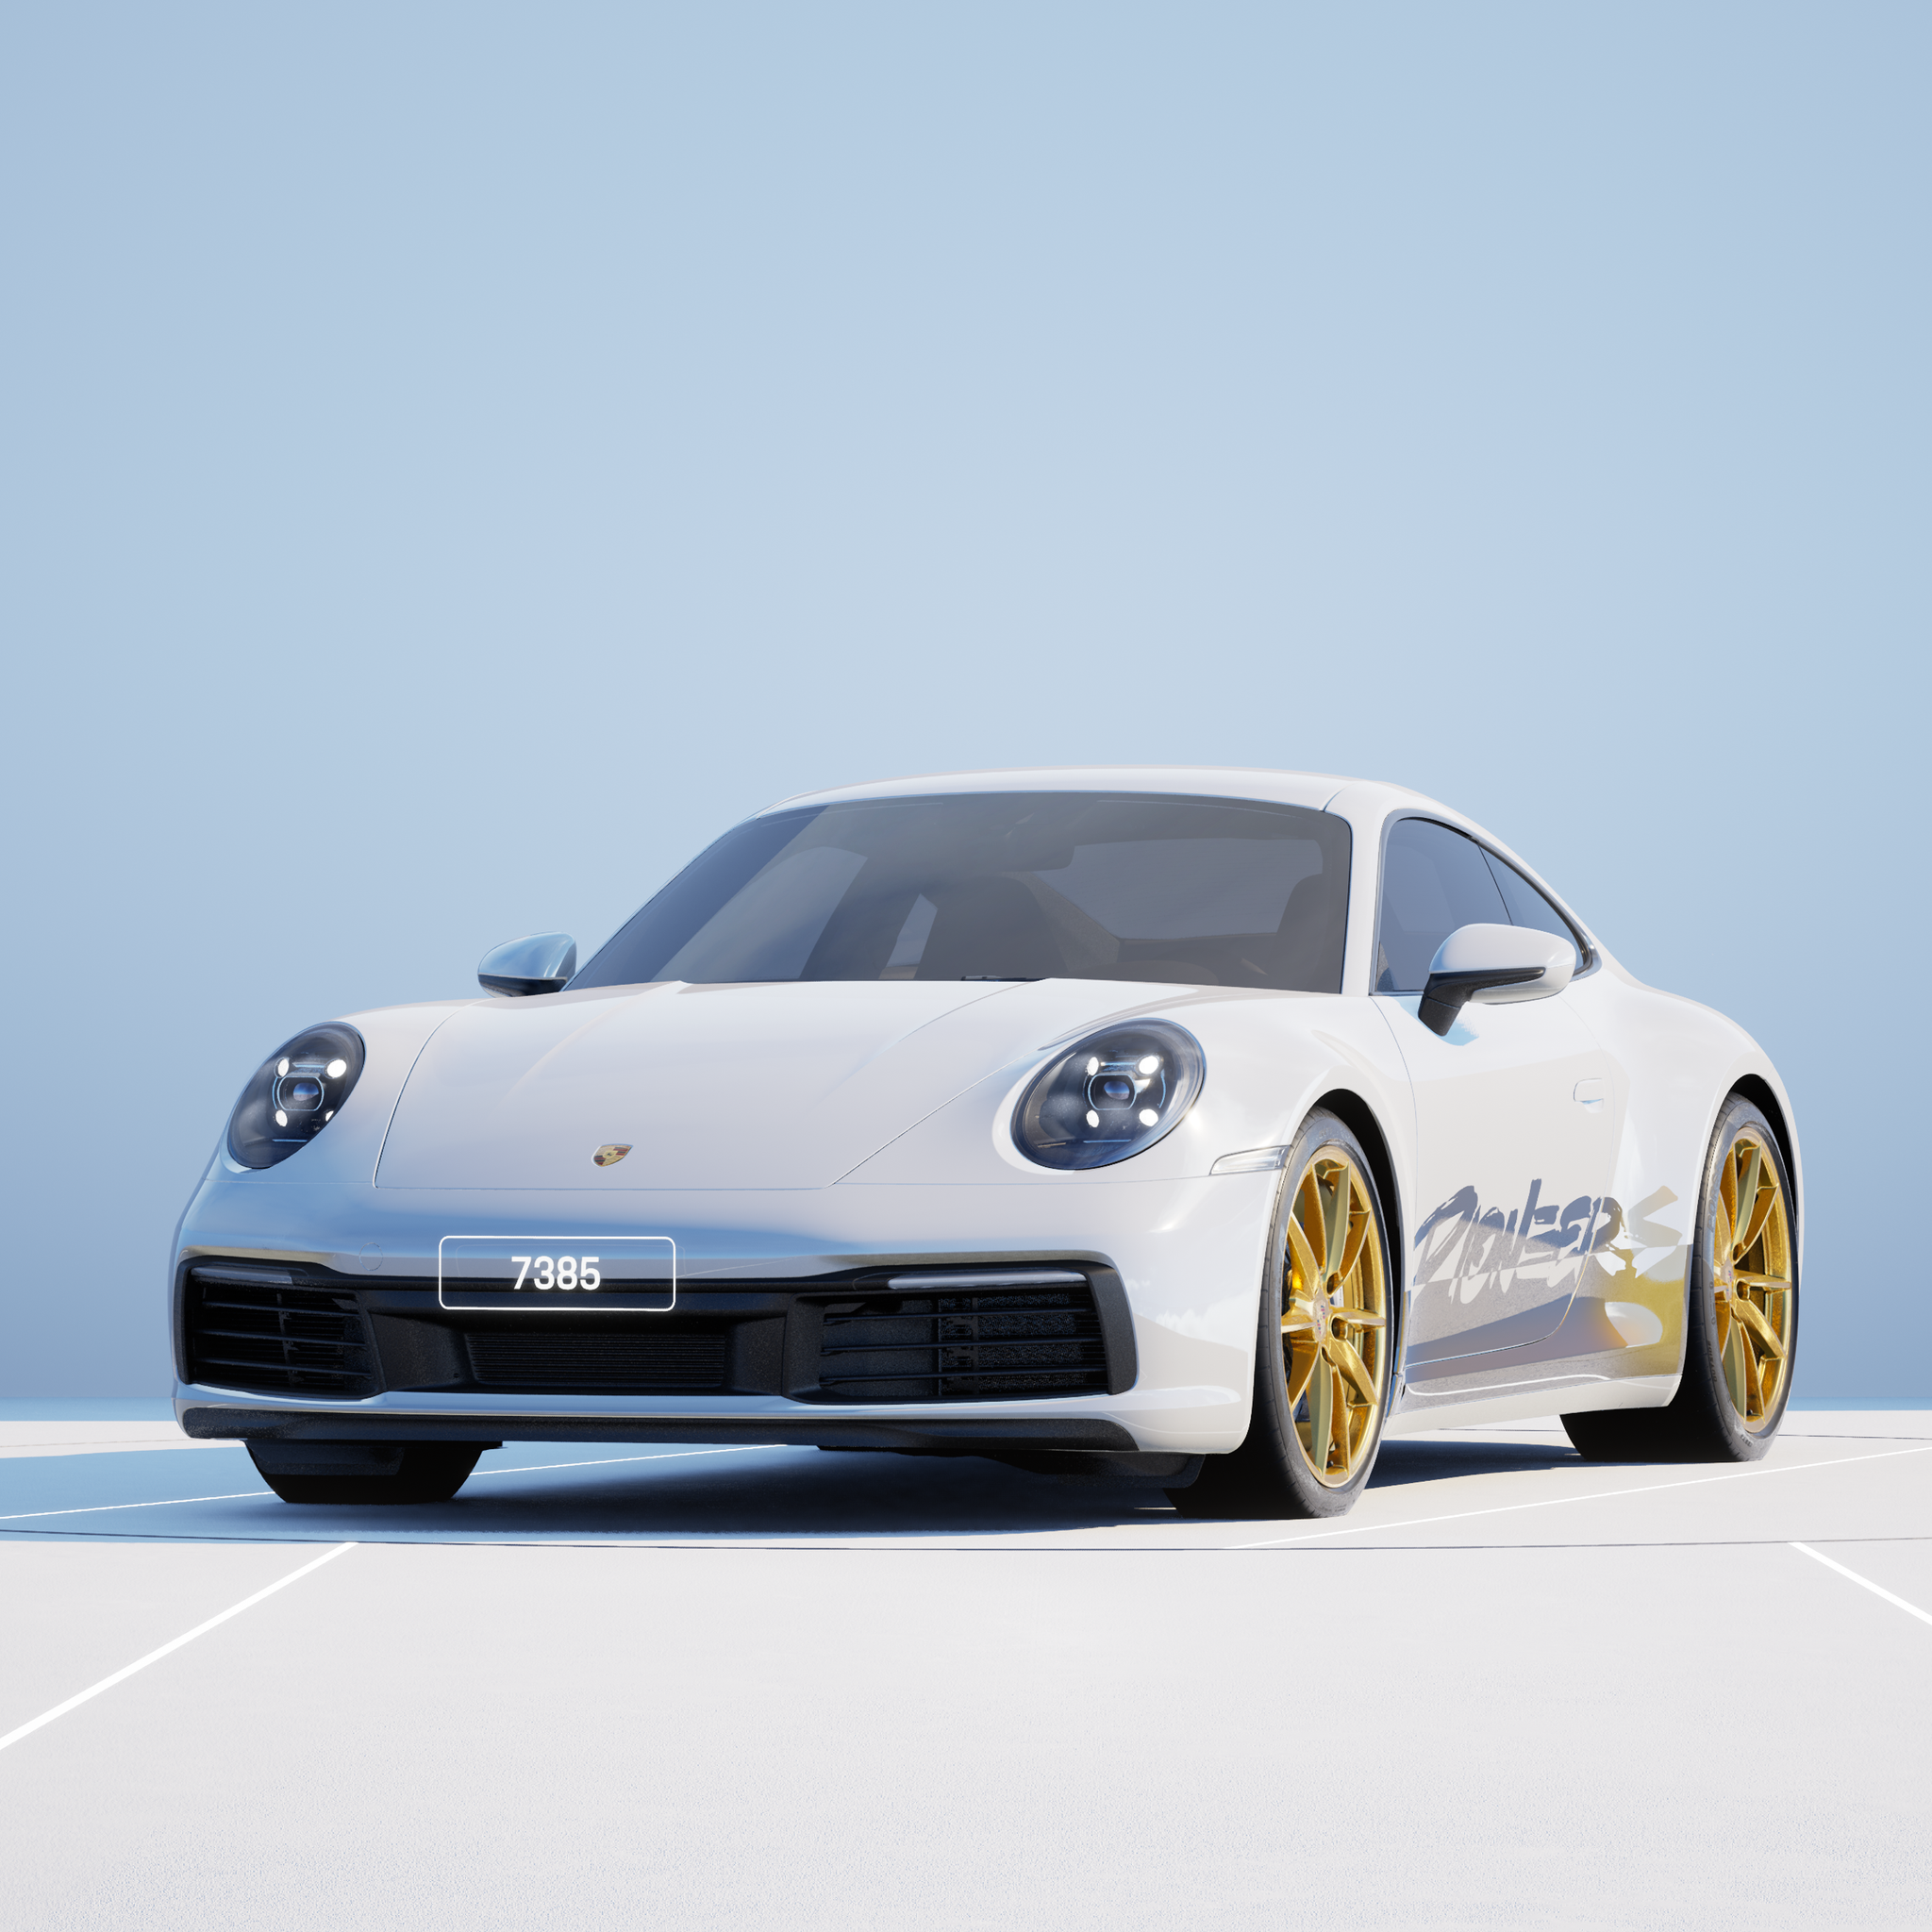 The PORSCHΞ 911 7385 image in phase